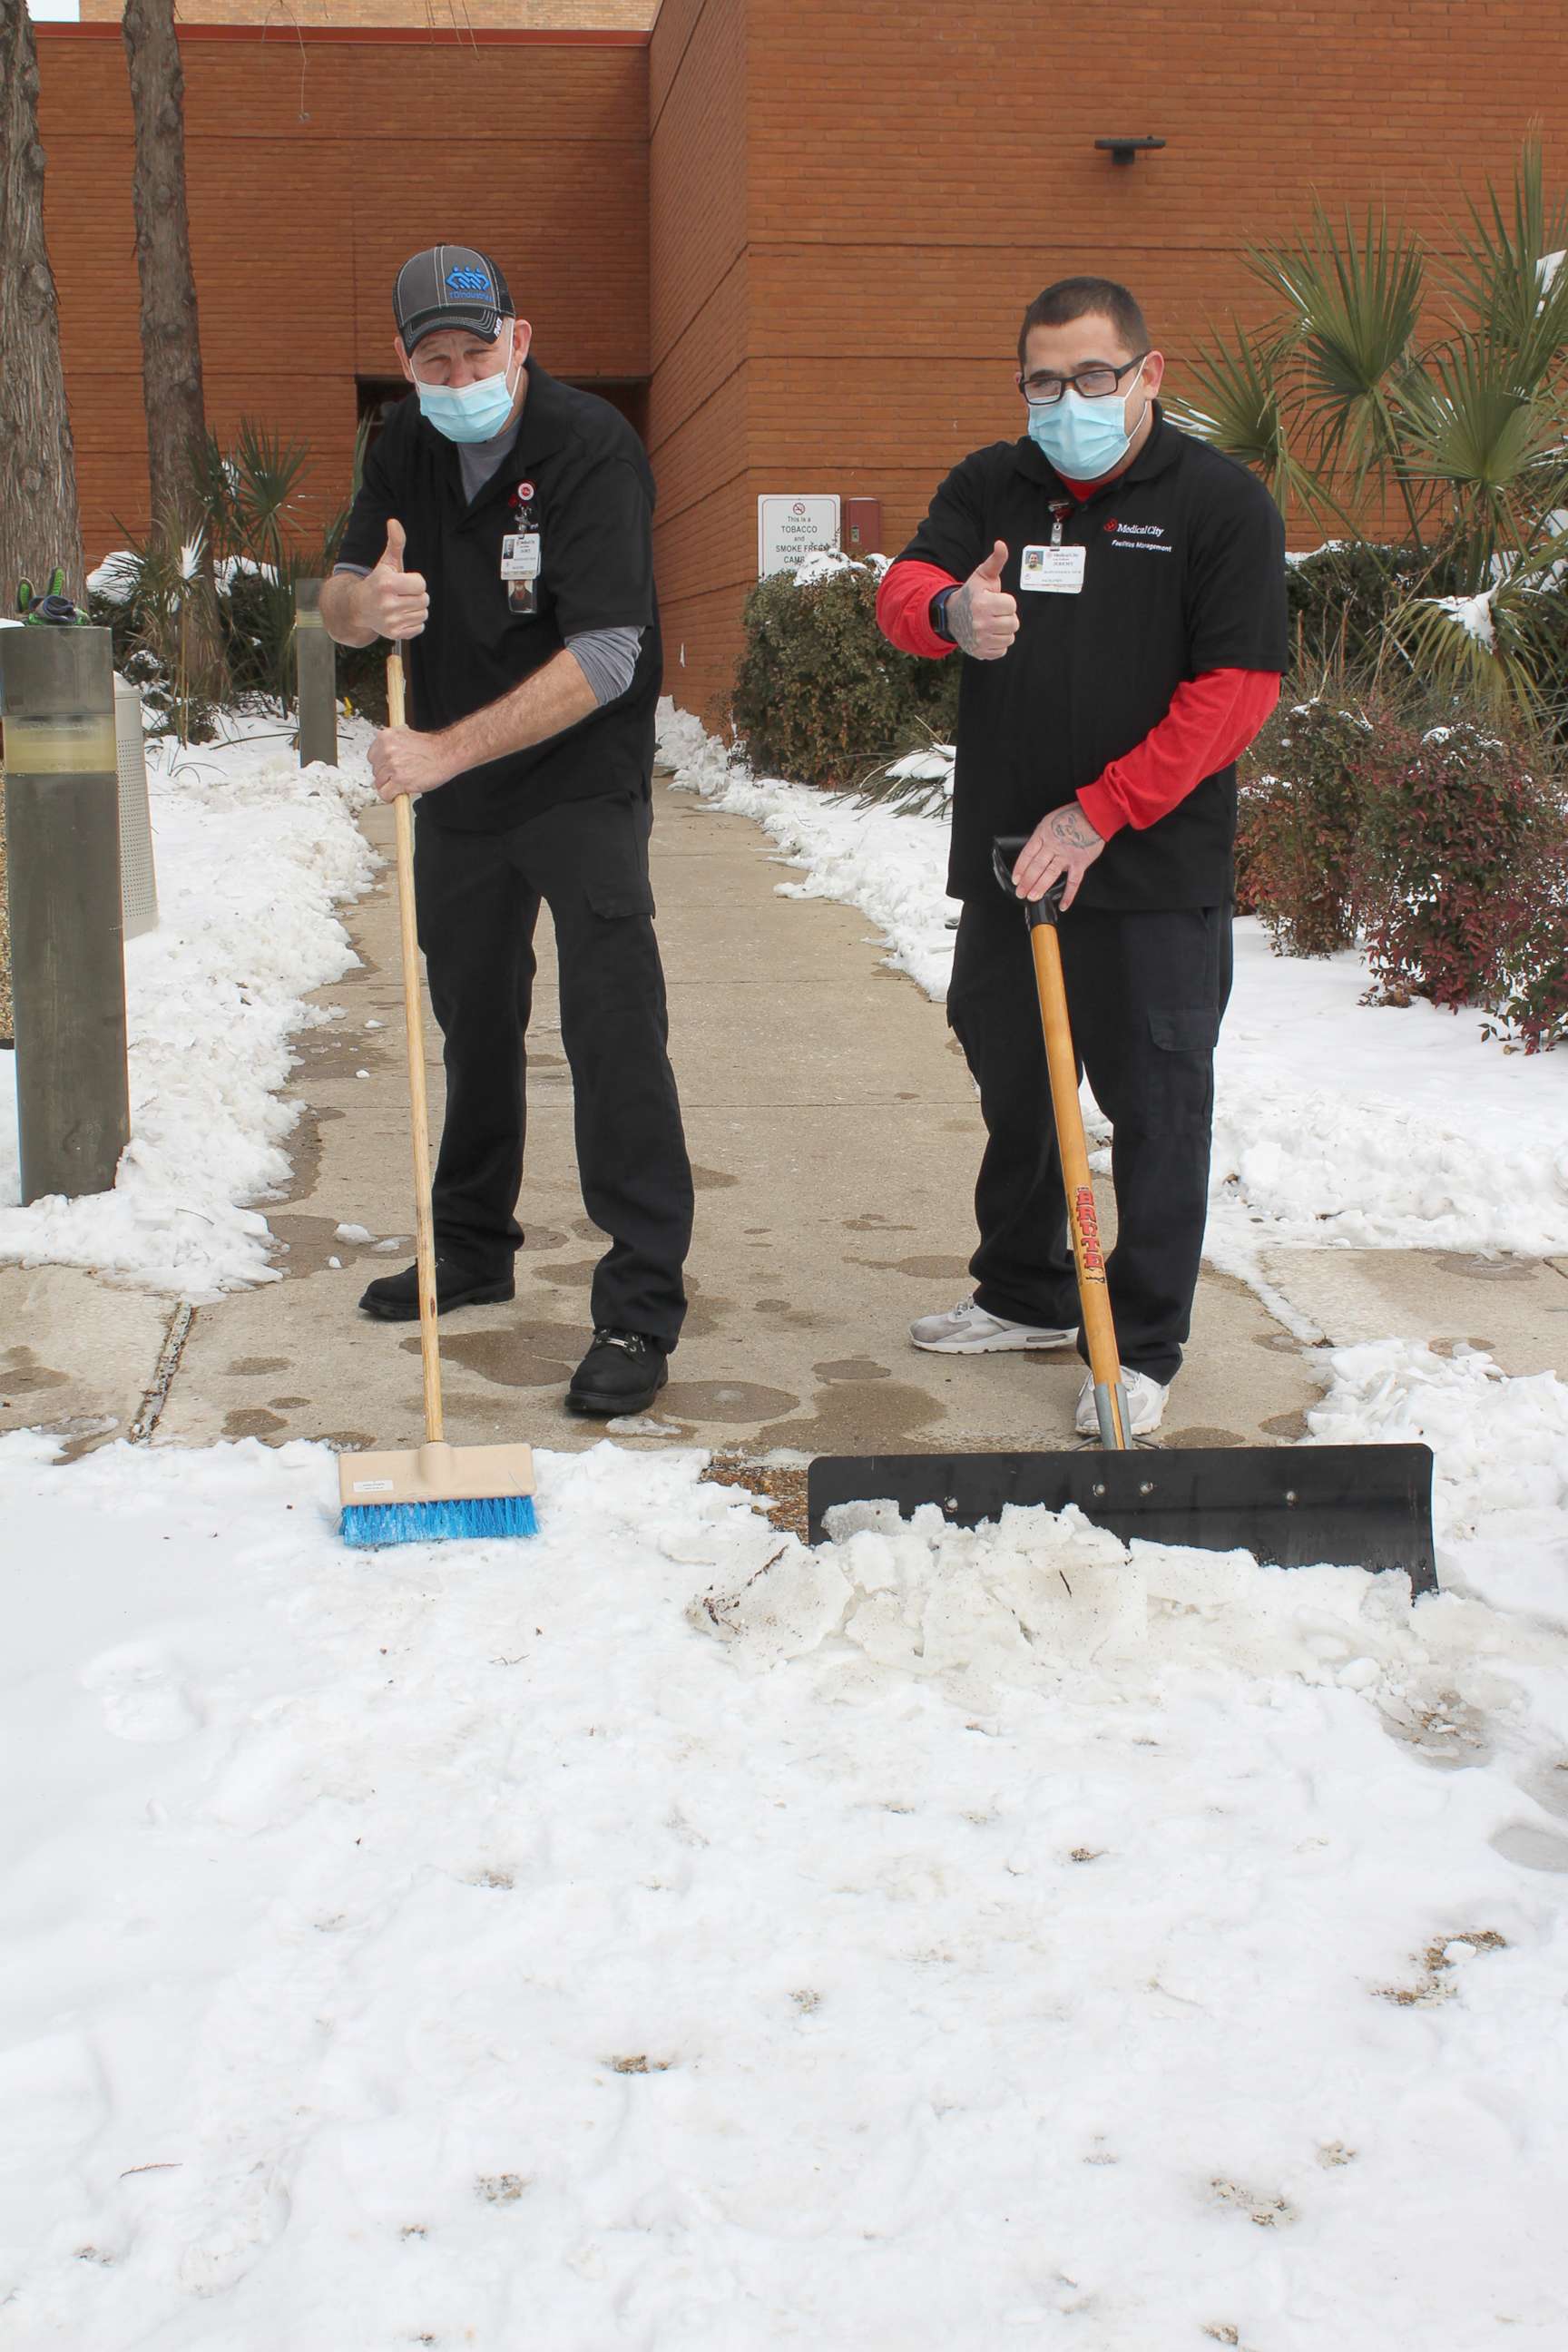 PHOTO: Medical City Healthcare employees pitch in to help during the Texas snowstorm.